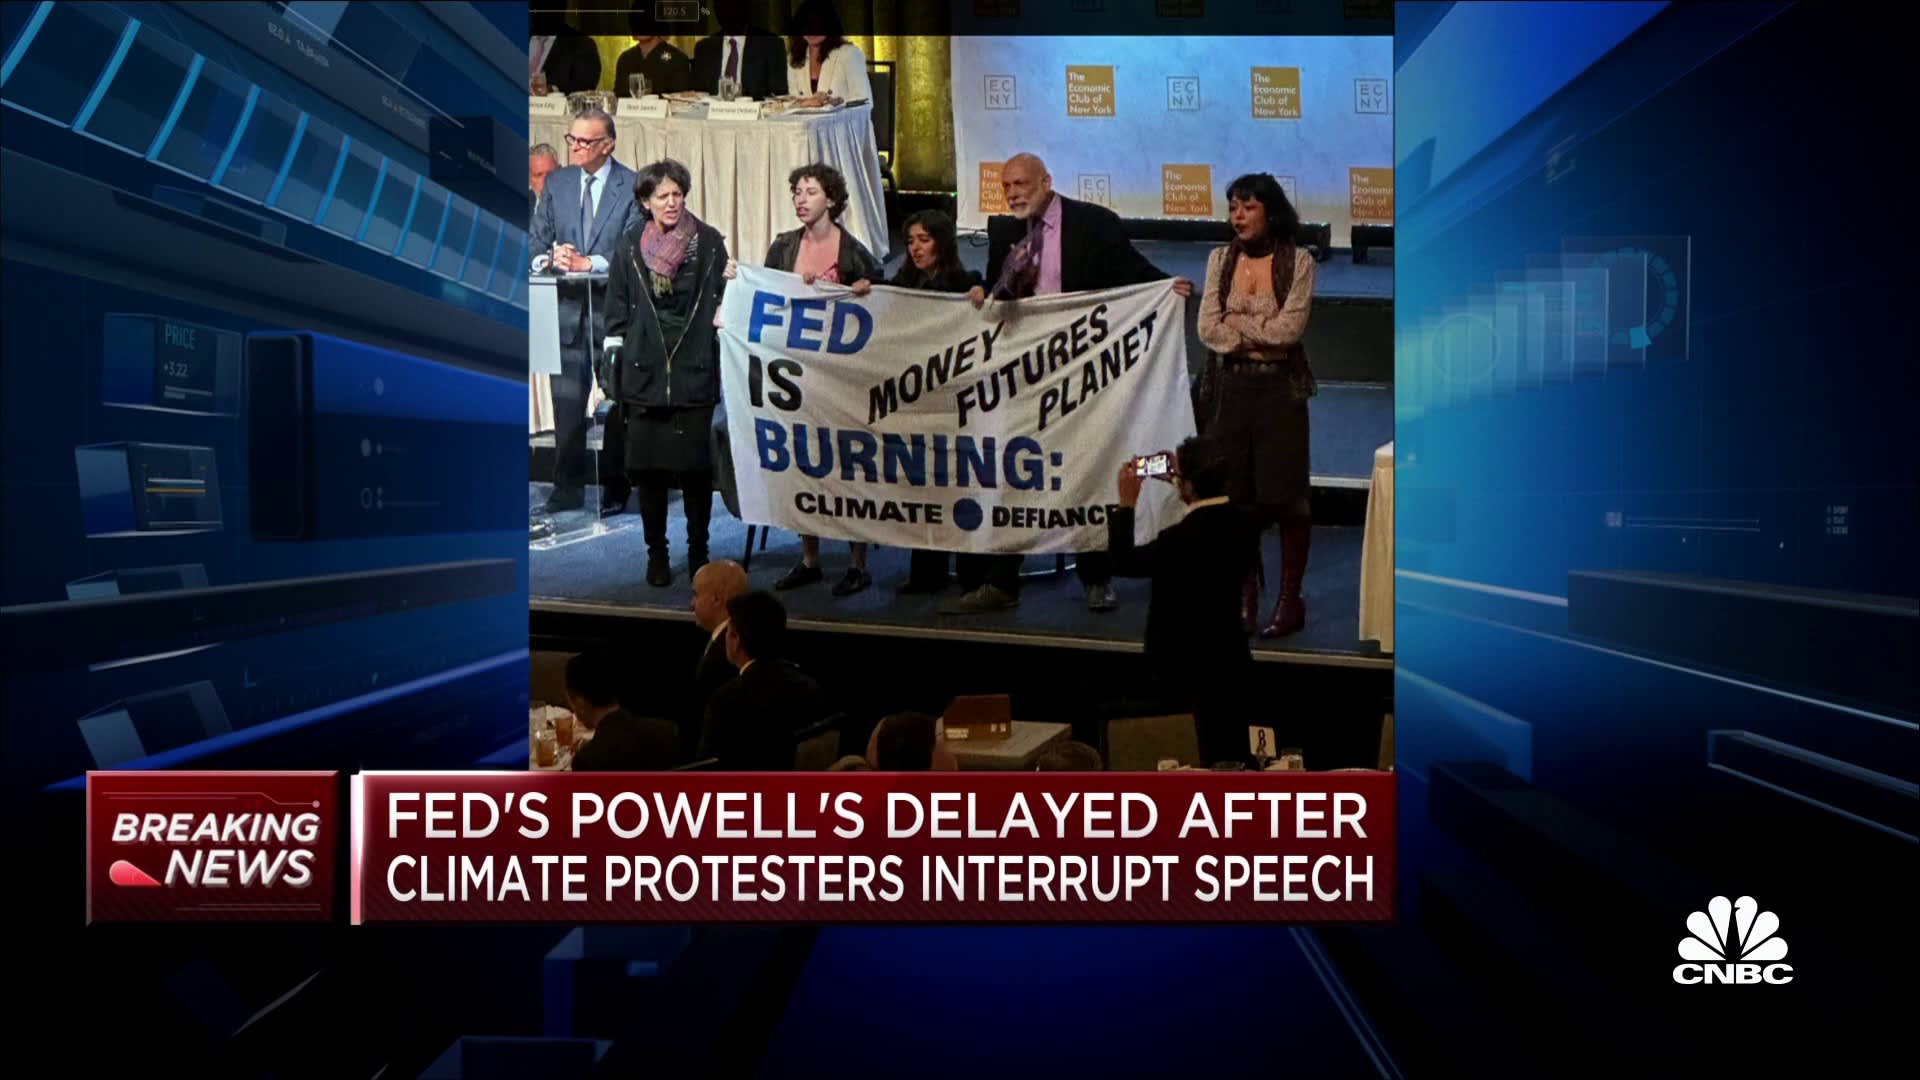 Climate protesters disrupt start of Federal Reserve Chair Powell’s economic speech